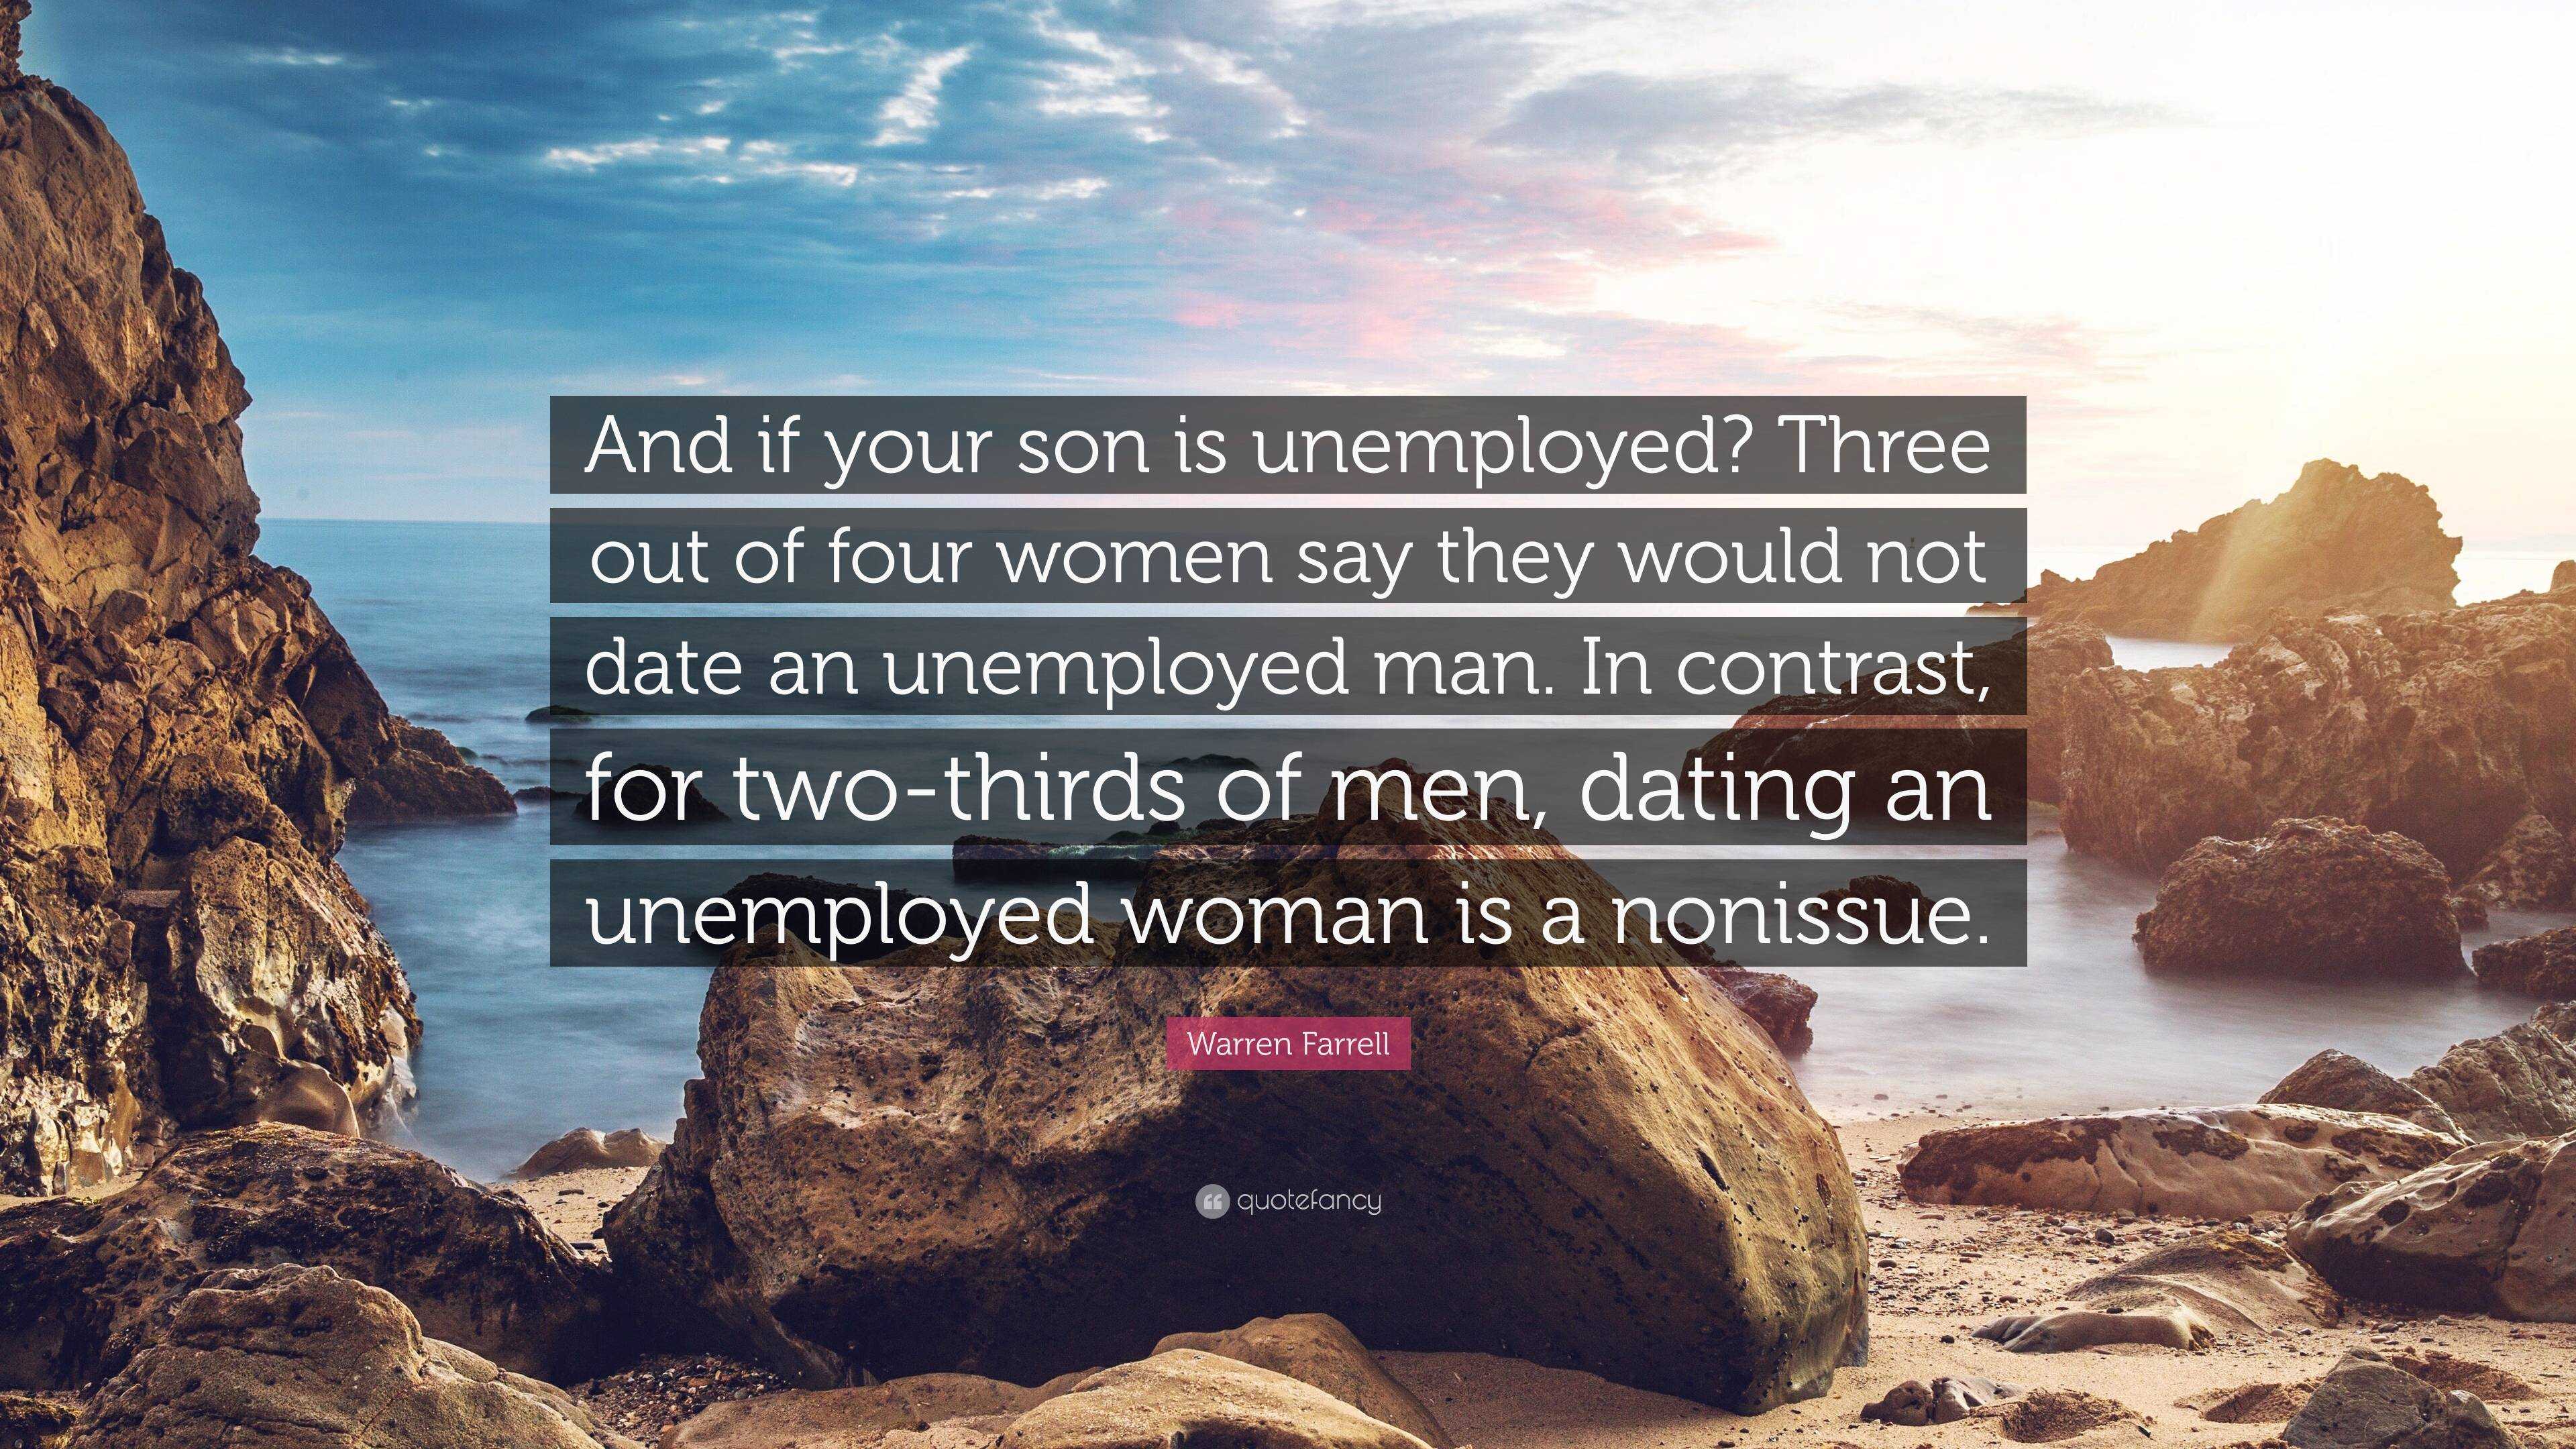 would a woman date an unemployed man